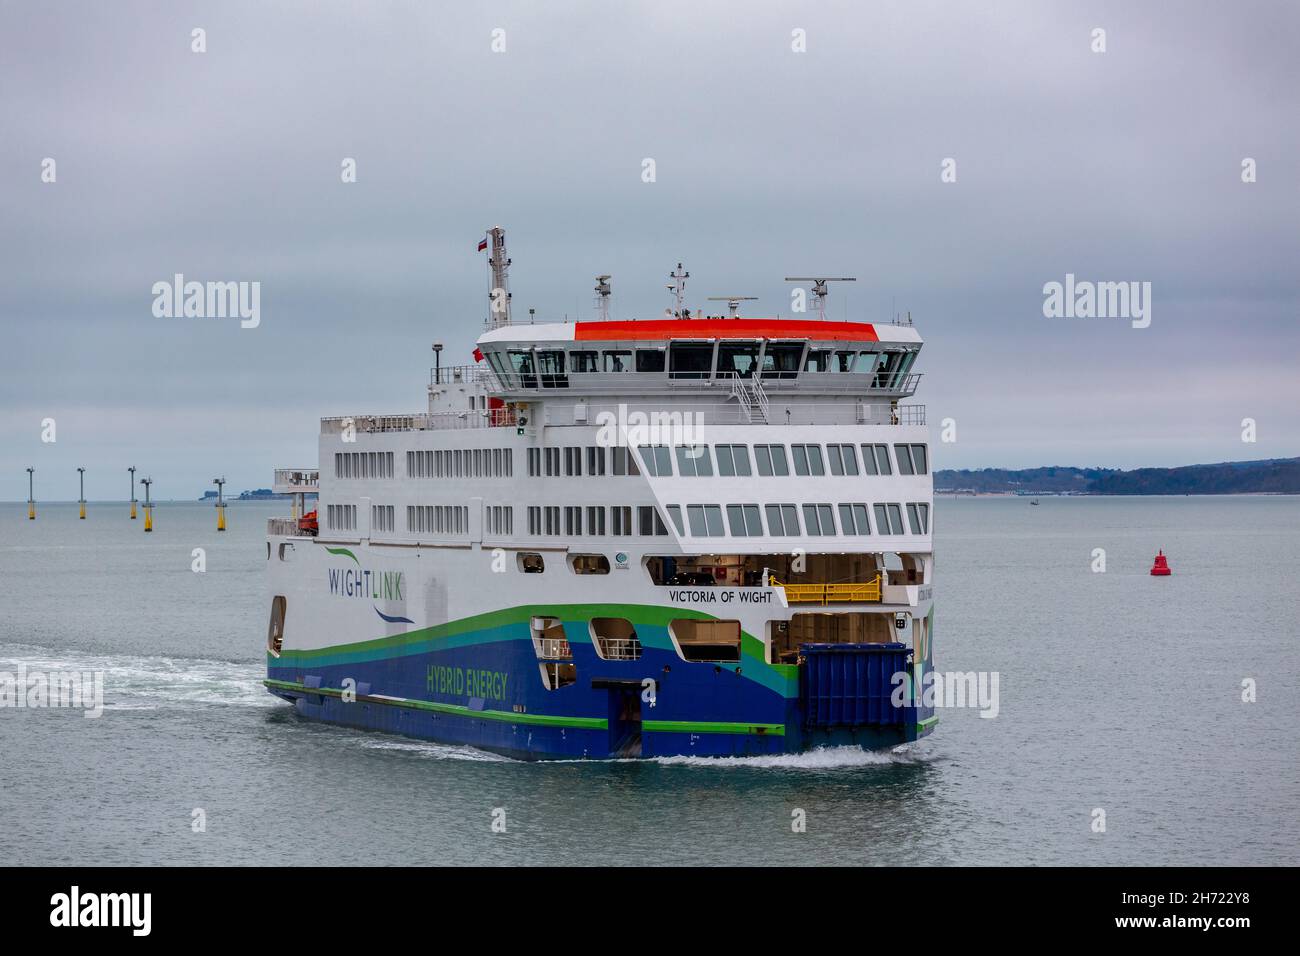 Wightlink car ferry Victoria of Wight arriving in Portsmouth Stock Photo